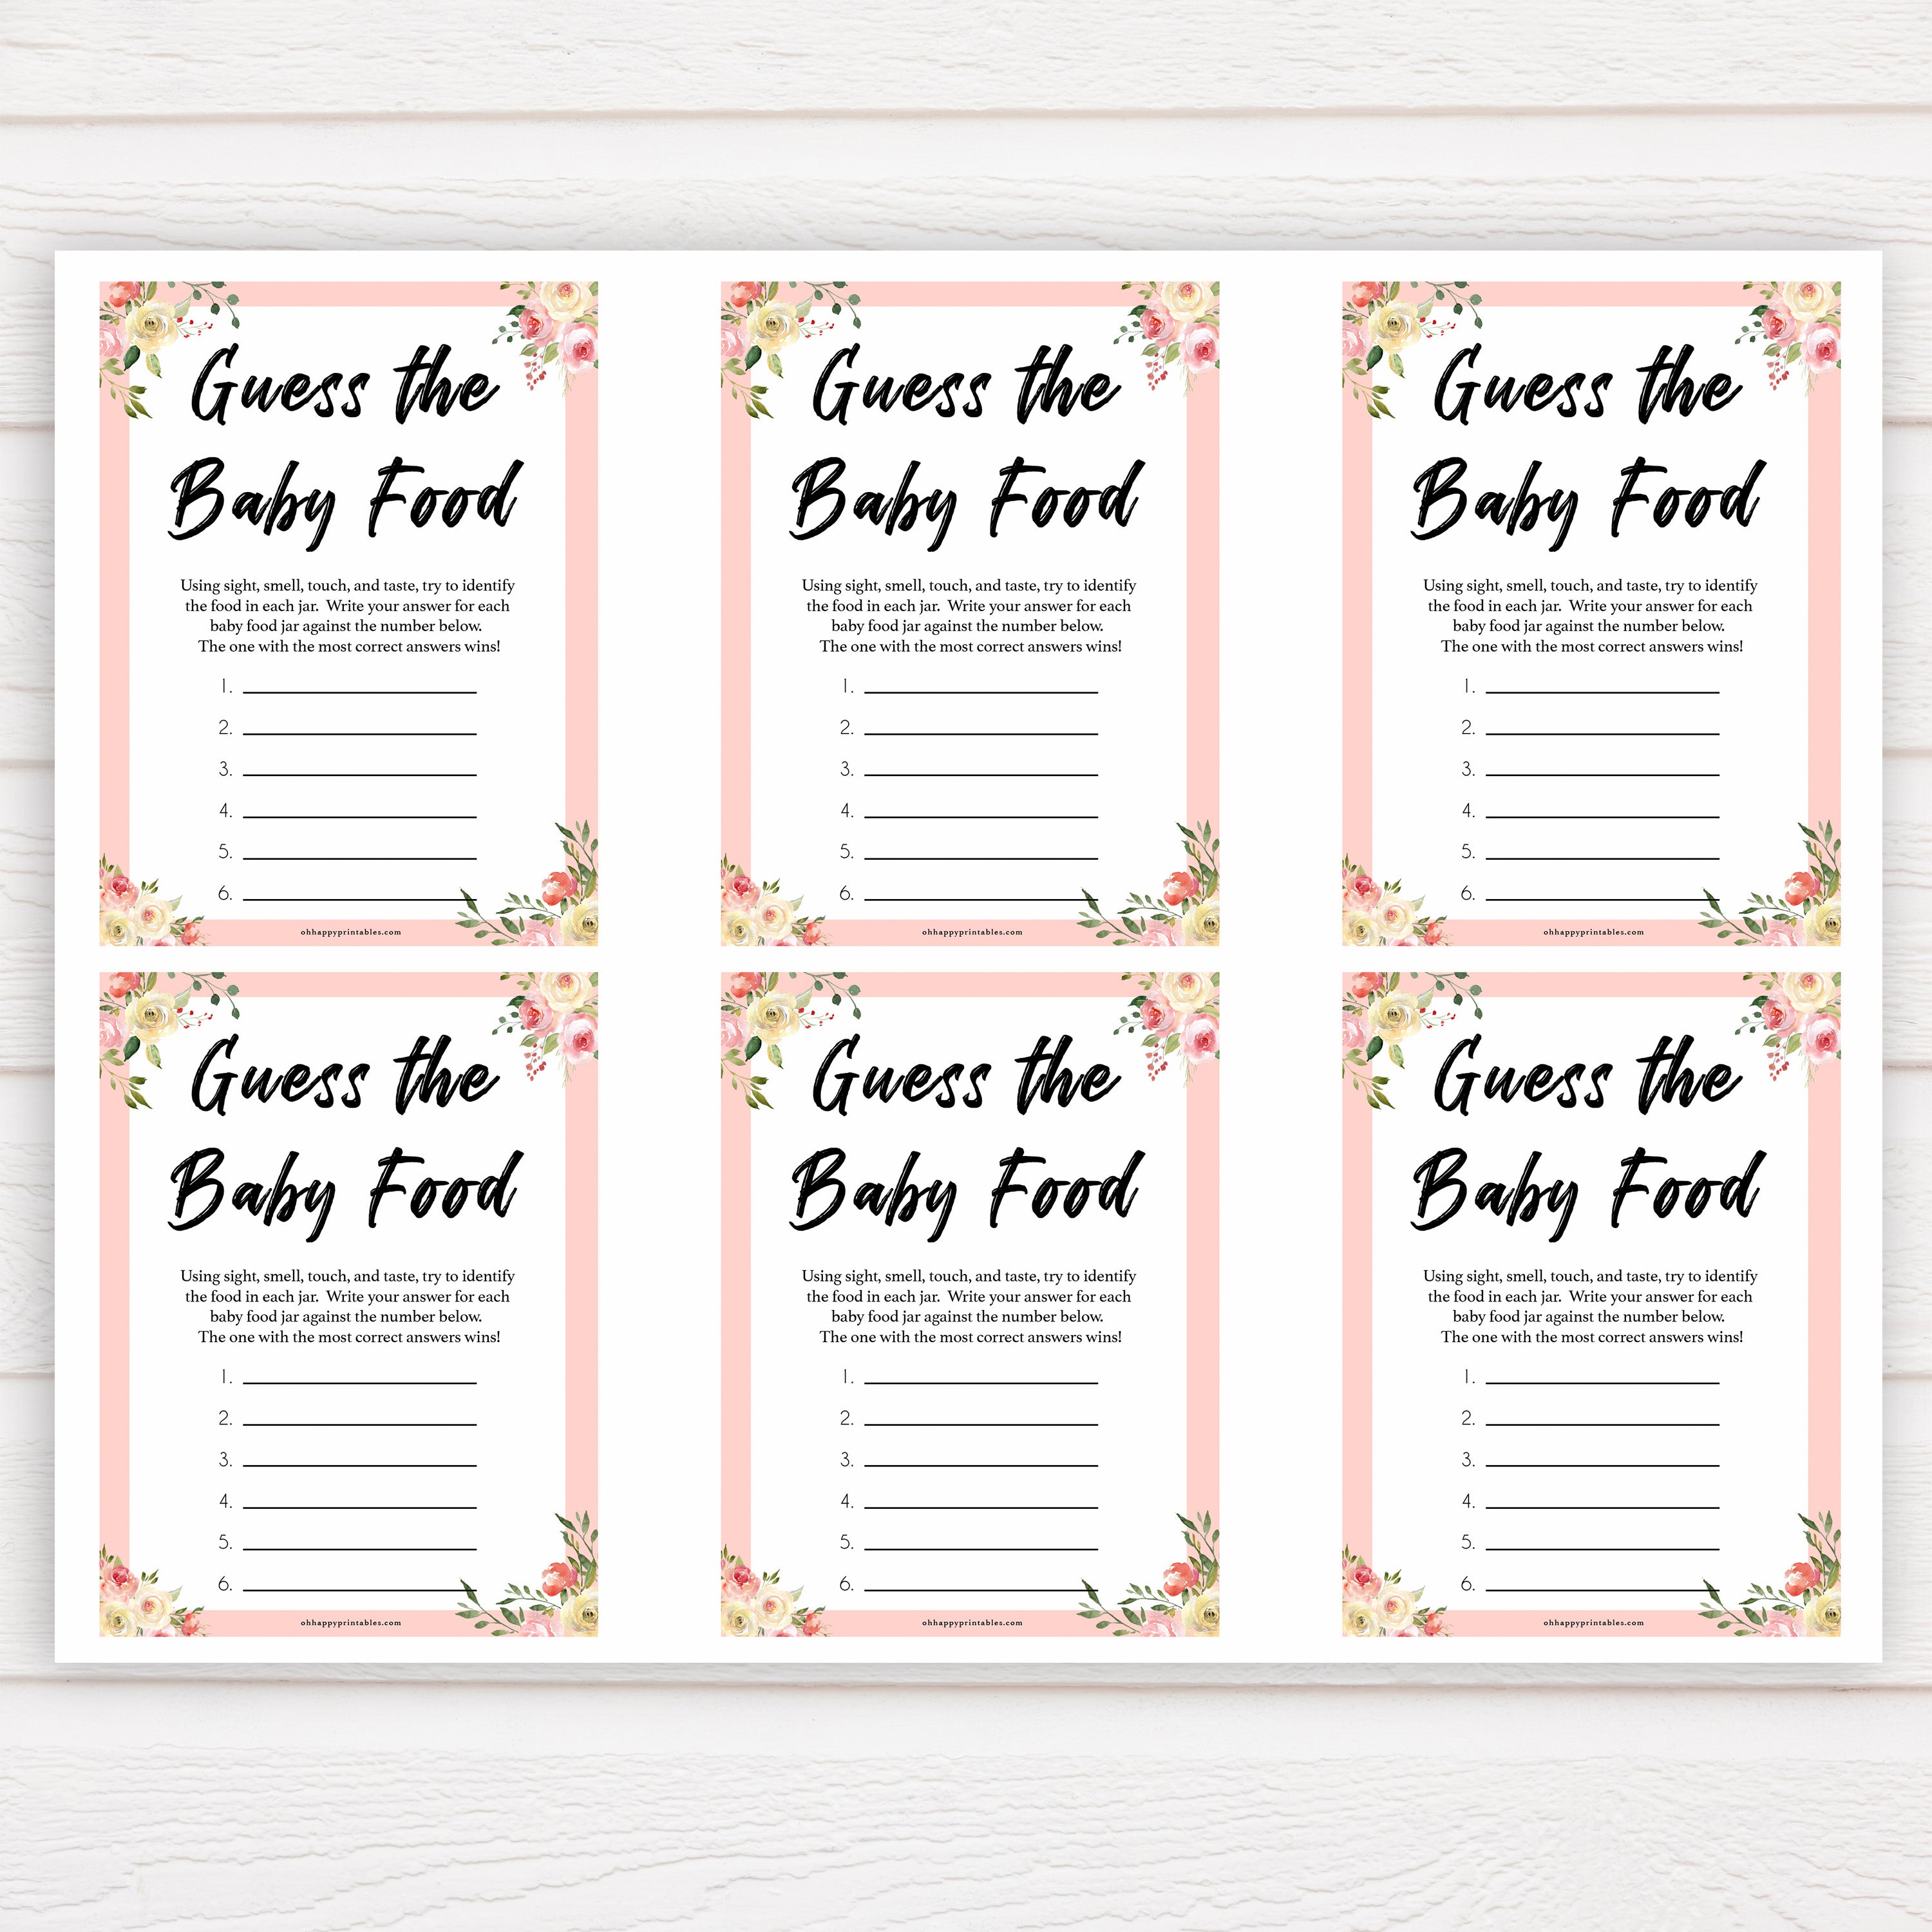 spring floral guess the baby food baby shower games, printable baby shower games, fun baby shower games, baby shower games, popular baby shower games